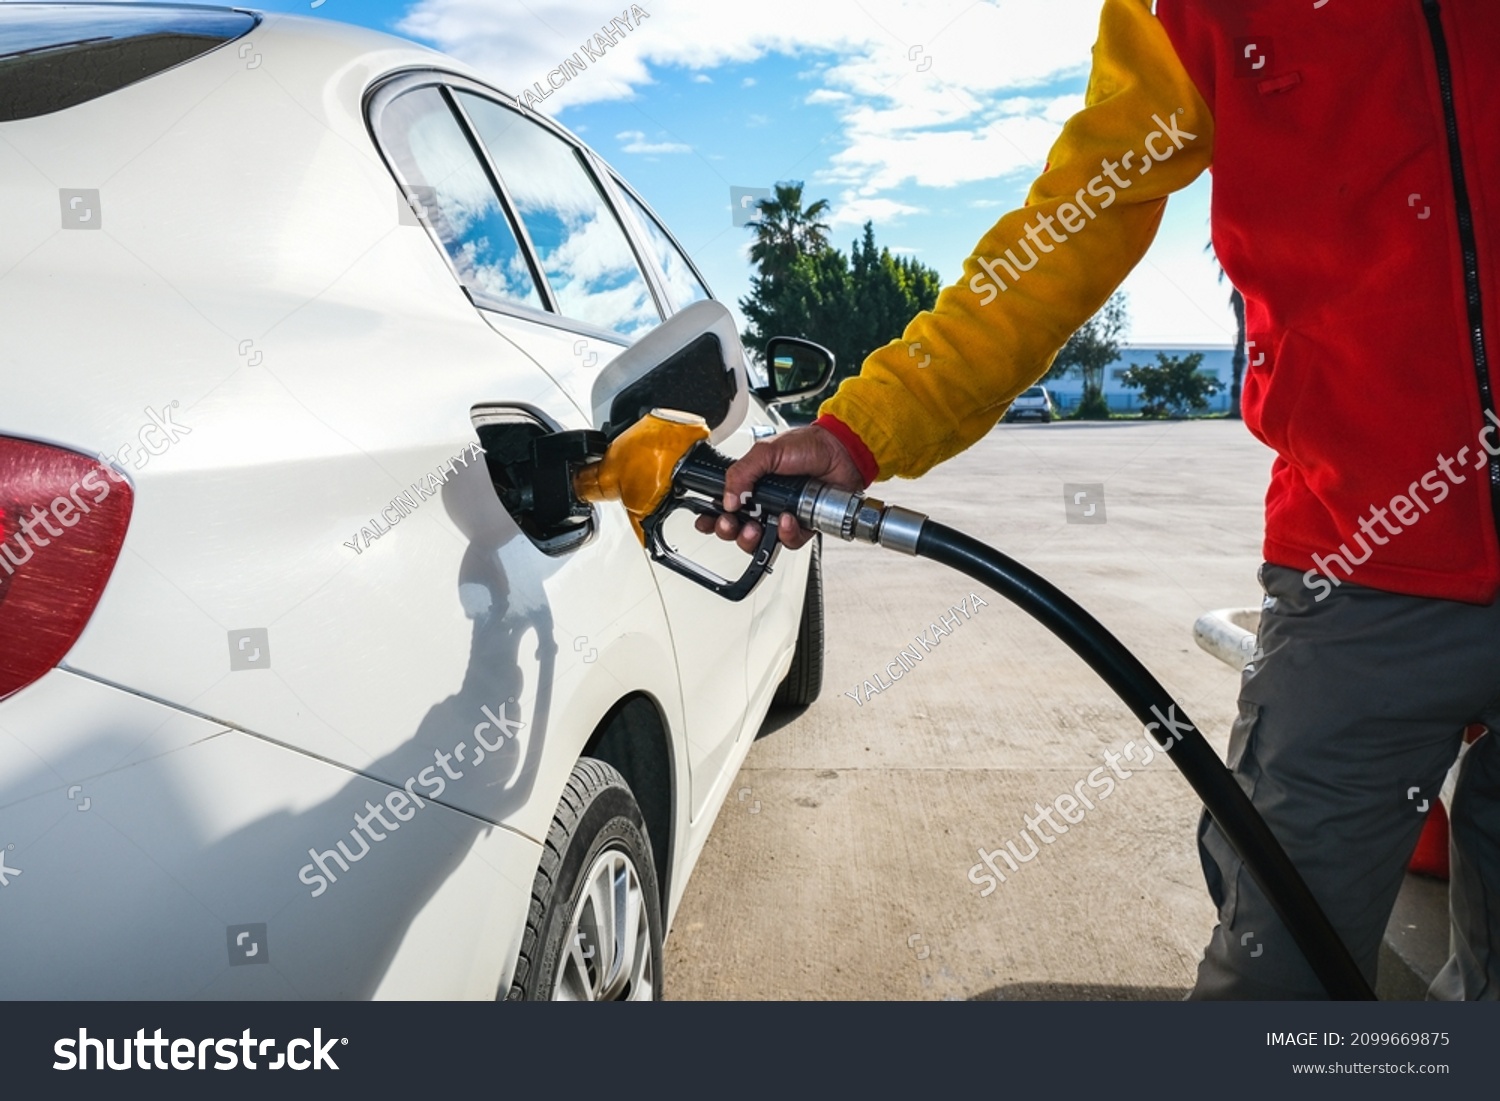 Man pumping gasoline fuel in car at gas station and being fill gas tank of white car in gas station, Concept of Global Fossil Fuel Consumption, Rising gasoline prices, Copy Space. #2099669875